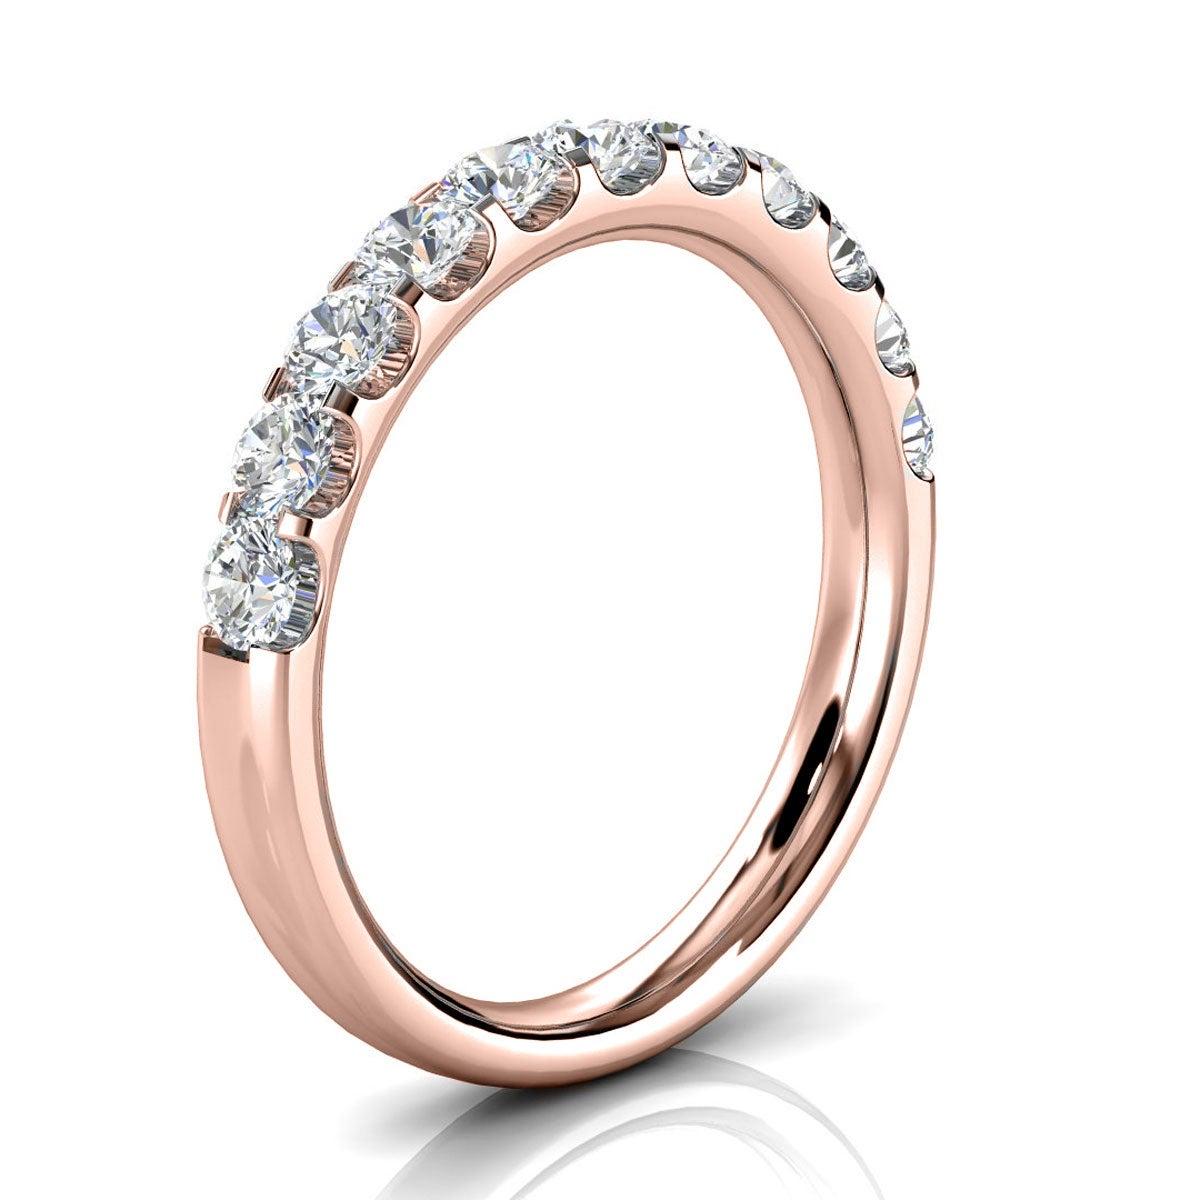 For Sale:  14K Rose Gold Valerie Micro-Prong Diamond Ring '1 Ct. Tw' 2